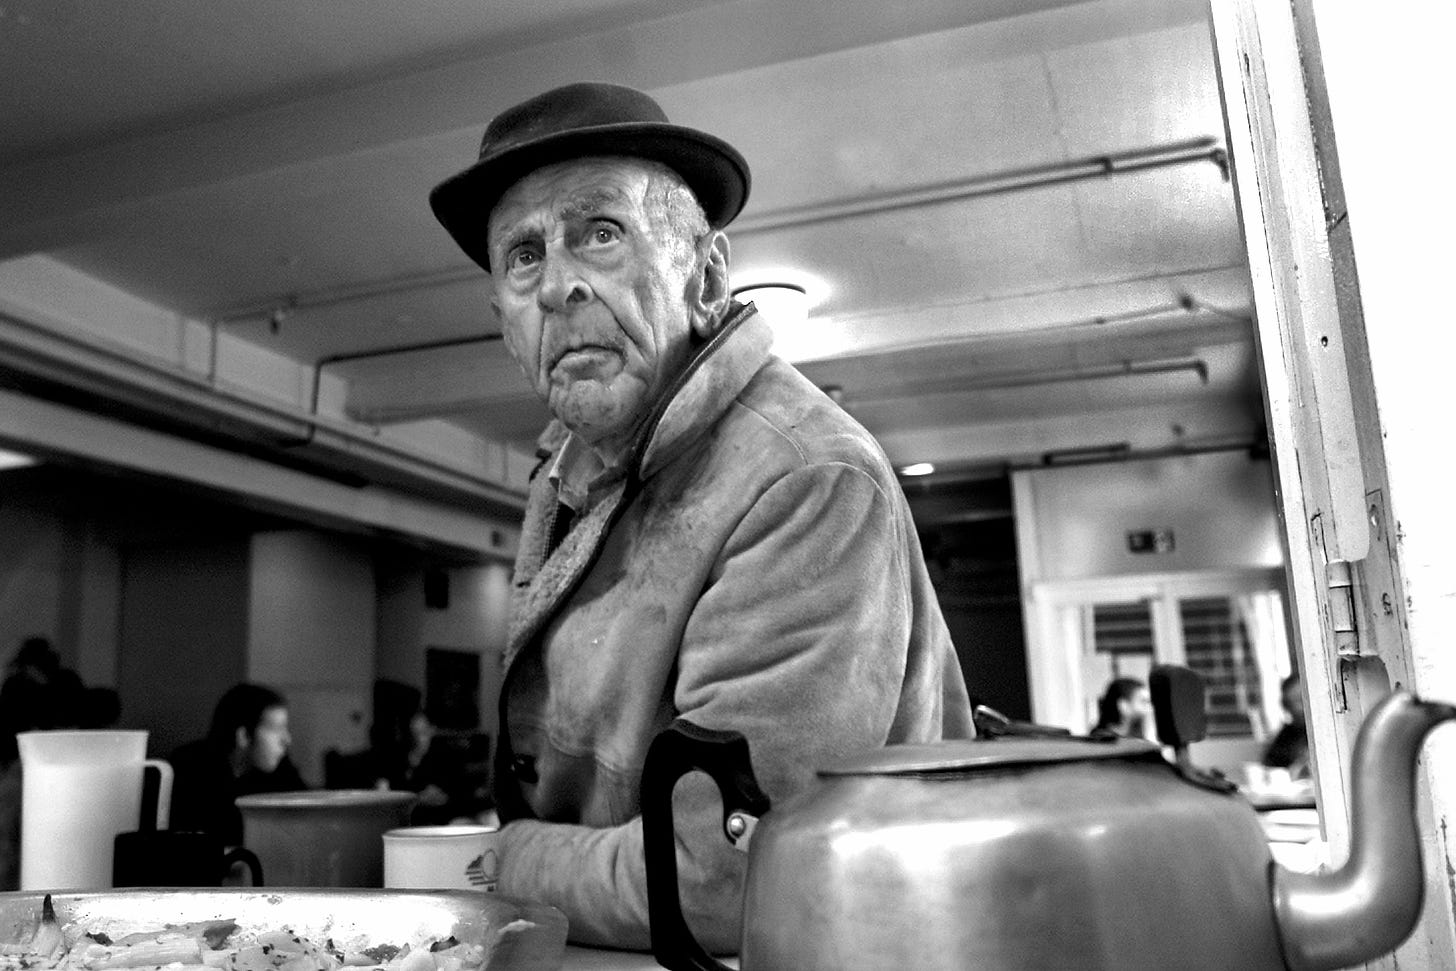 A black and white photo of a man called William. Unwashed and wearing a sheepskin coat and a porkpie hat, I photographed William while serving tea in a Northampton homeless shelter. William told me it was his birthday and would like an extra spoon of sugar in his tea. No Idea if it was his birthday but I wished him a happy one and gave him two extra. 